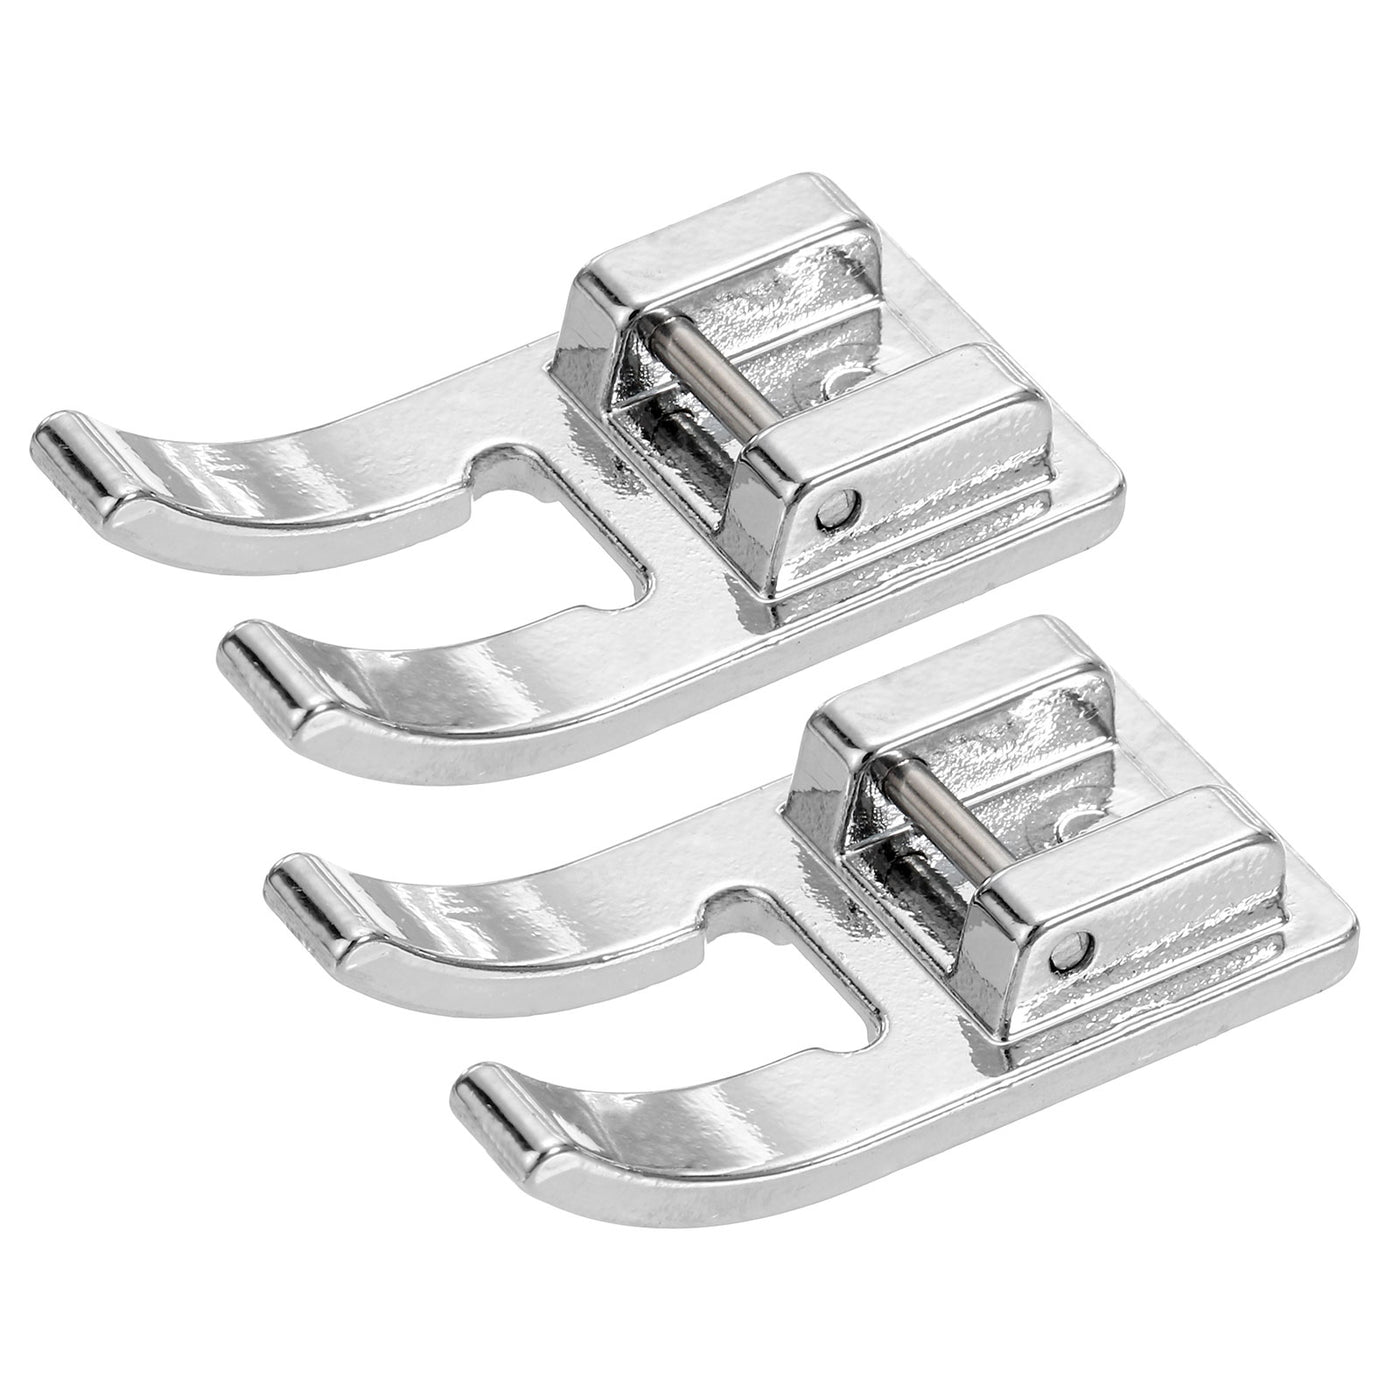 uxcell Uxcell Open Toe Foot Sewing Machine Foot Galvanized Iron Presser Foot 29x15mm, 2Pcs